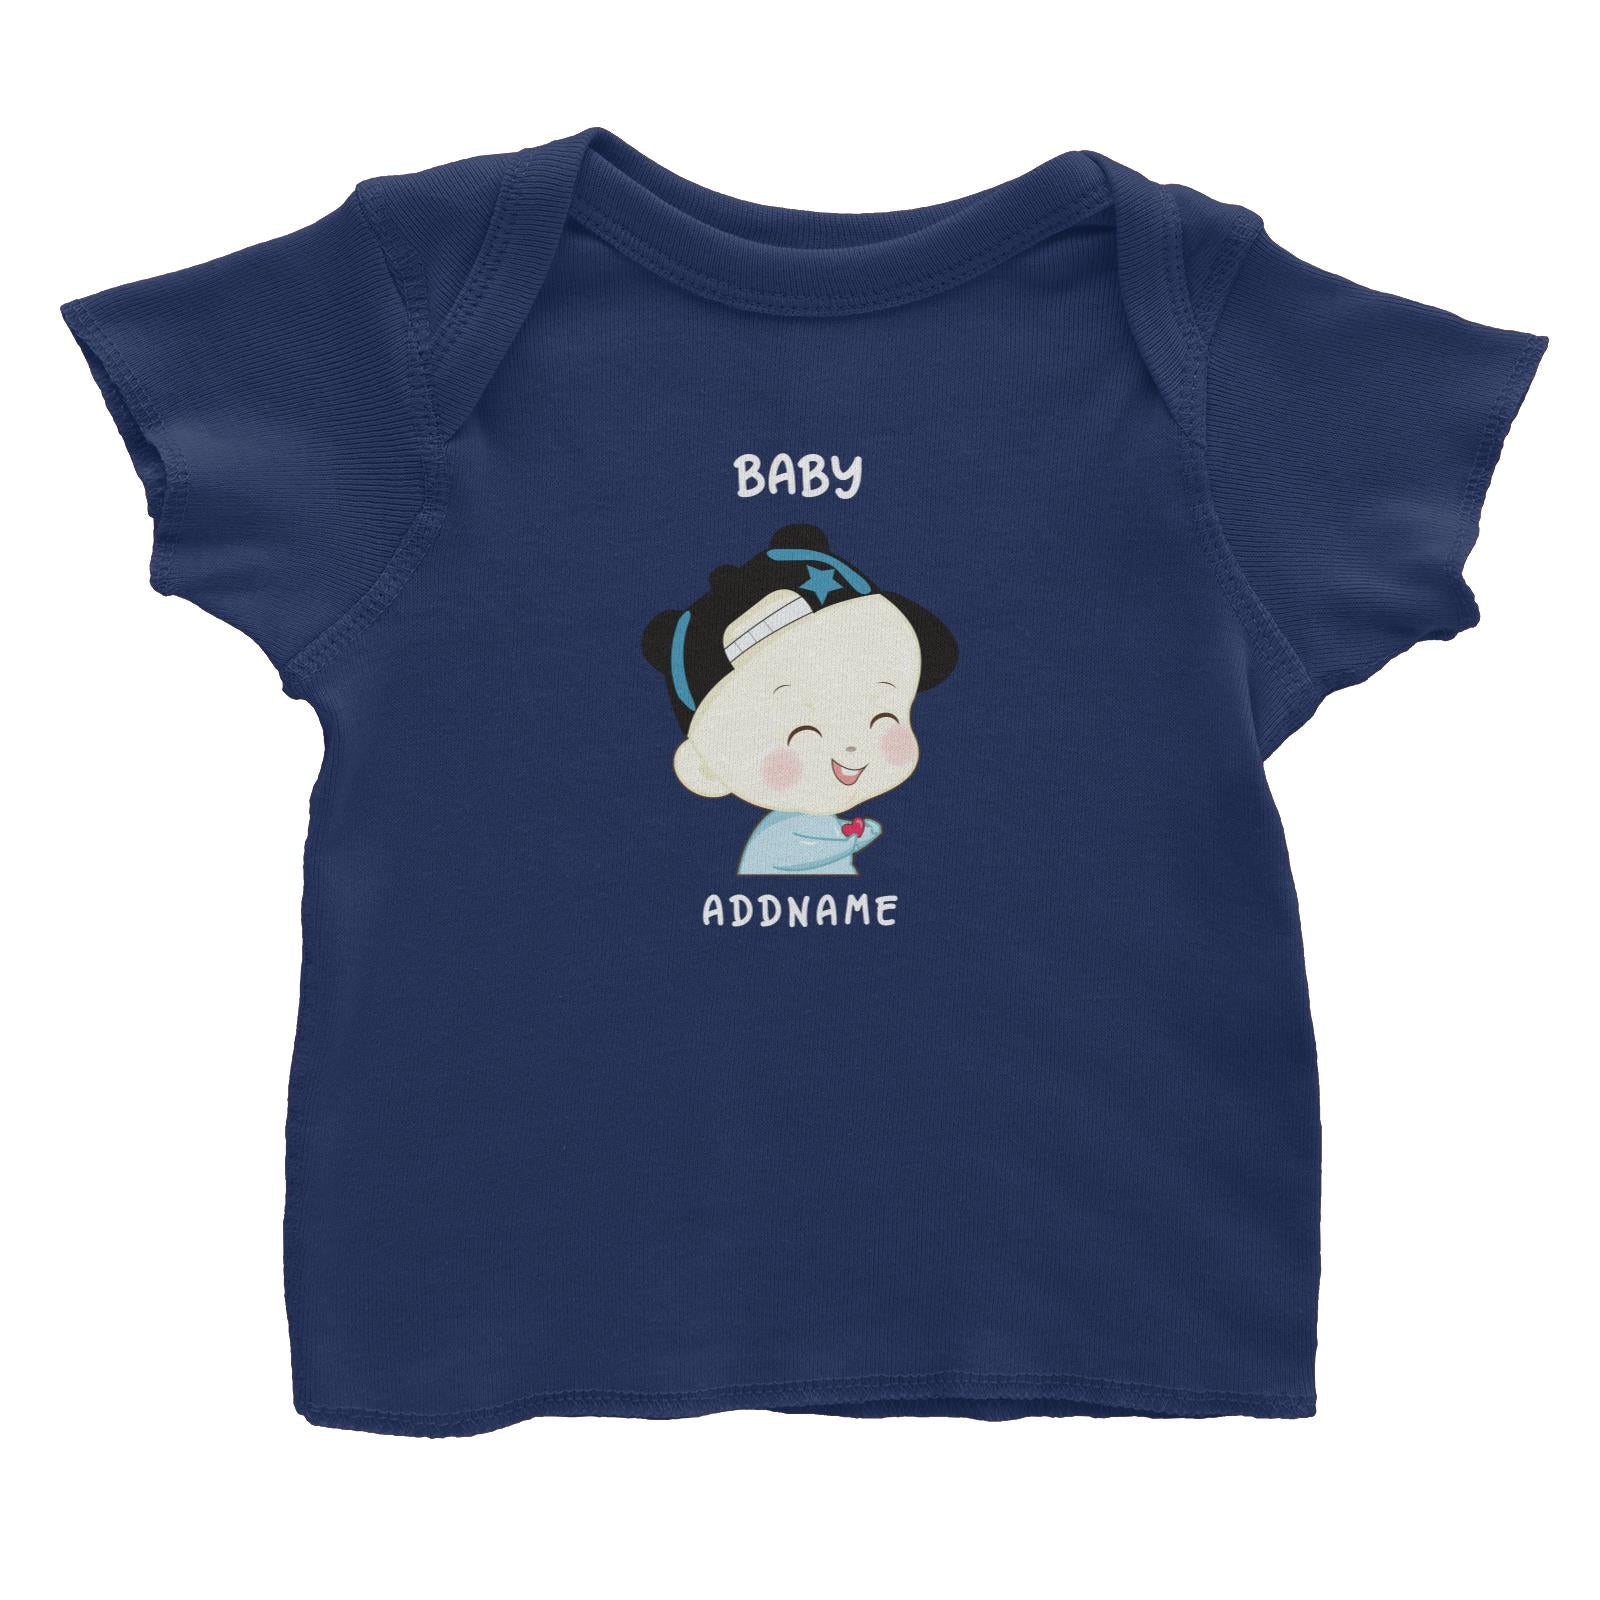 My Lovely Family Series Baby Boy Addname Baby T-Shirt